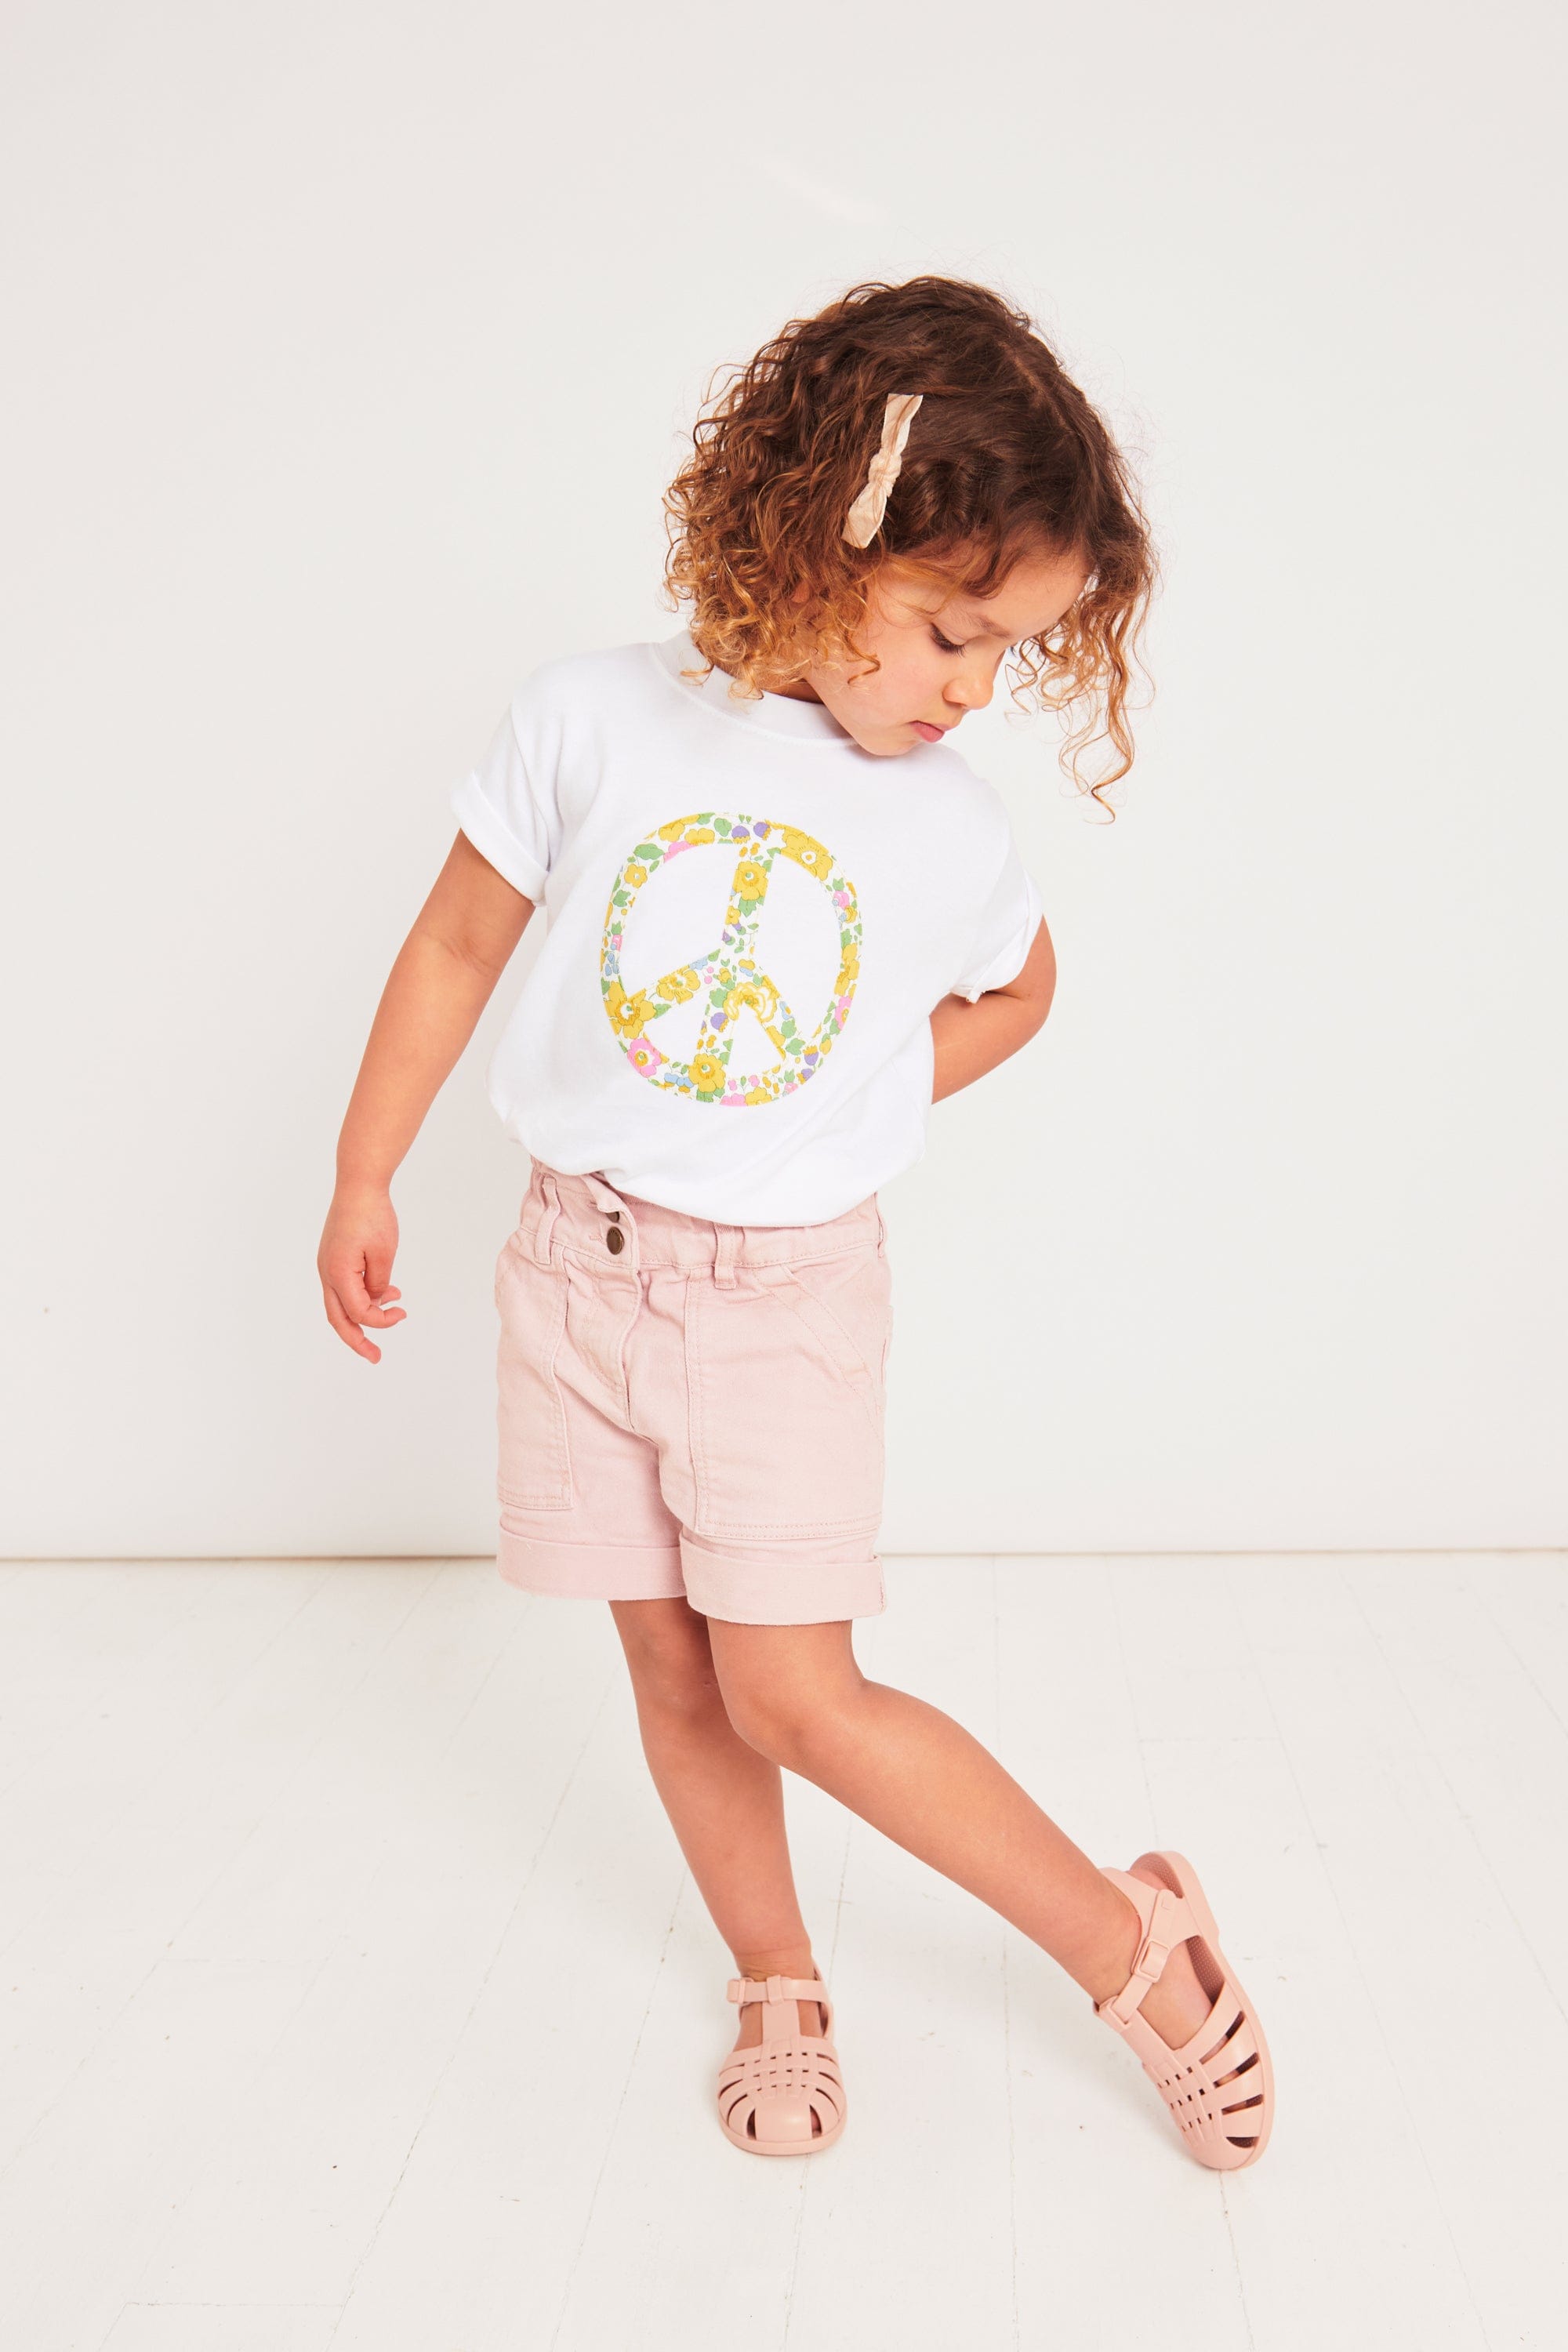 Magnificent Stanley Tee Peace T-Shirt in choice of Liberty Print